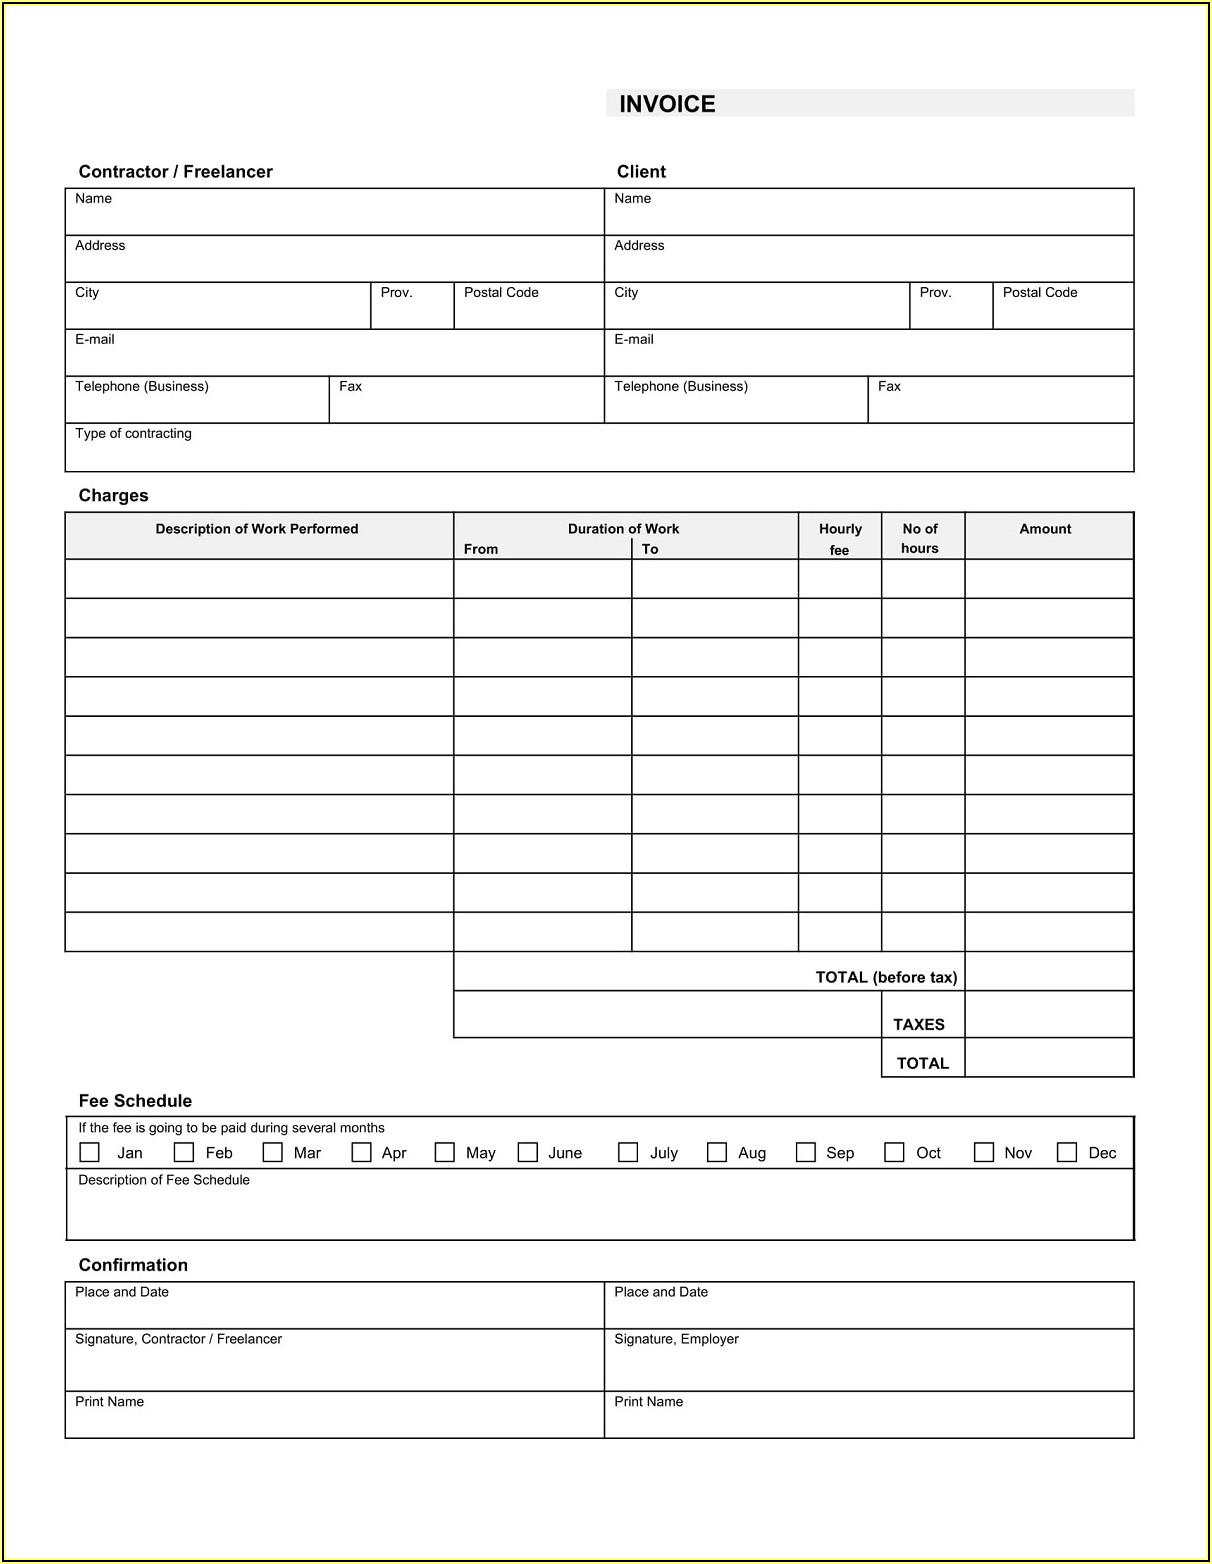 General Contractor Invoice Example